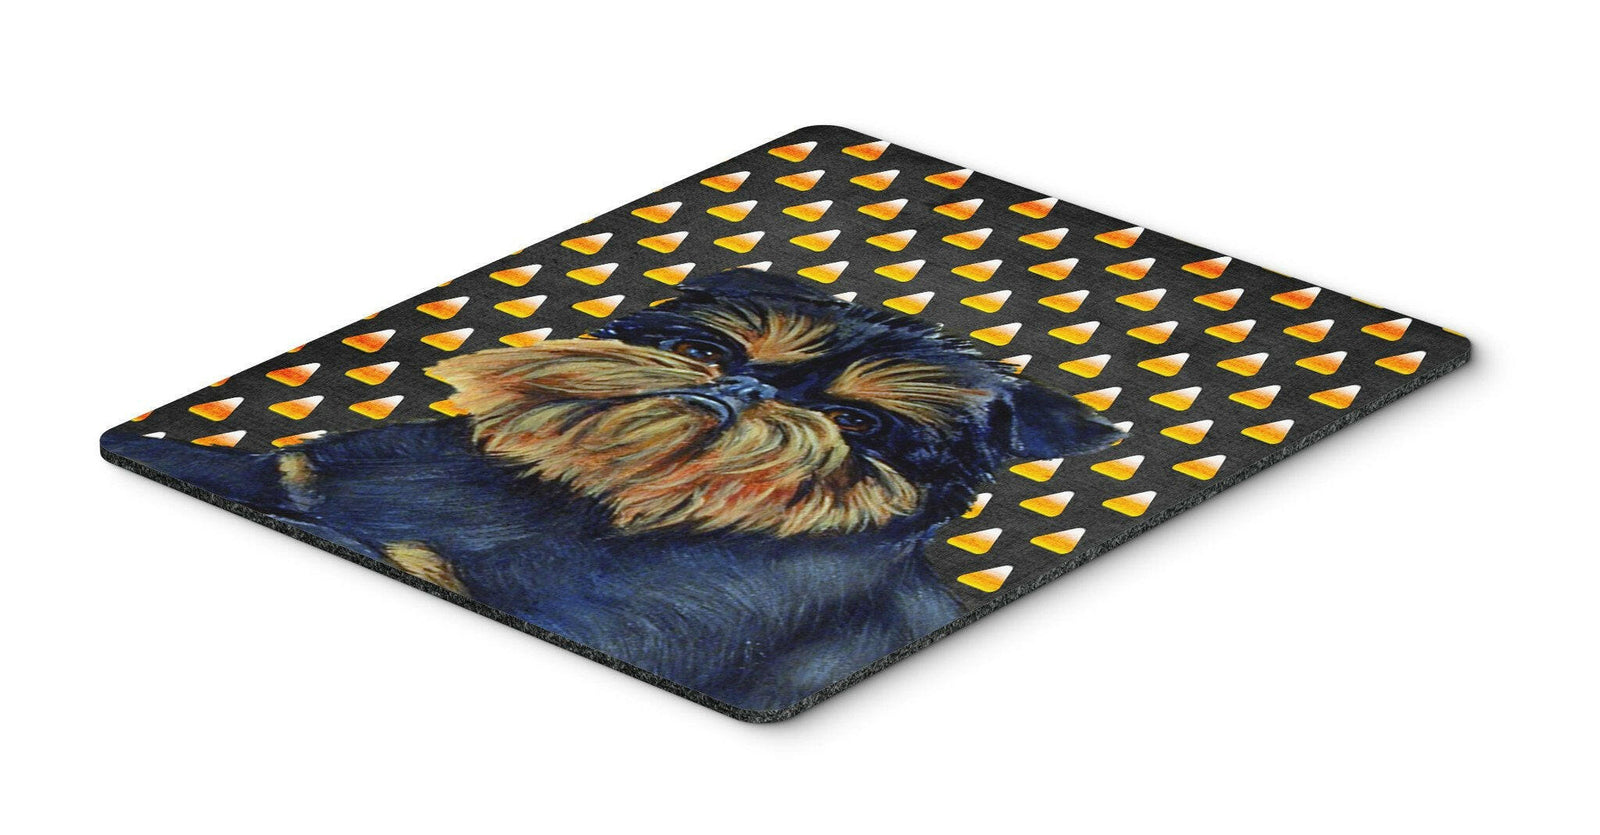 Brussels Griffon Candy Corn Halloween Portrait Mouse Pad, Hot Pad or Trivet by Caroline's Treasures